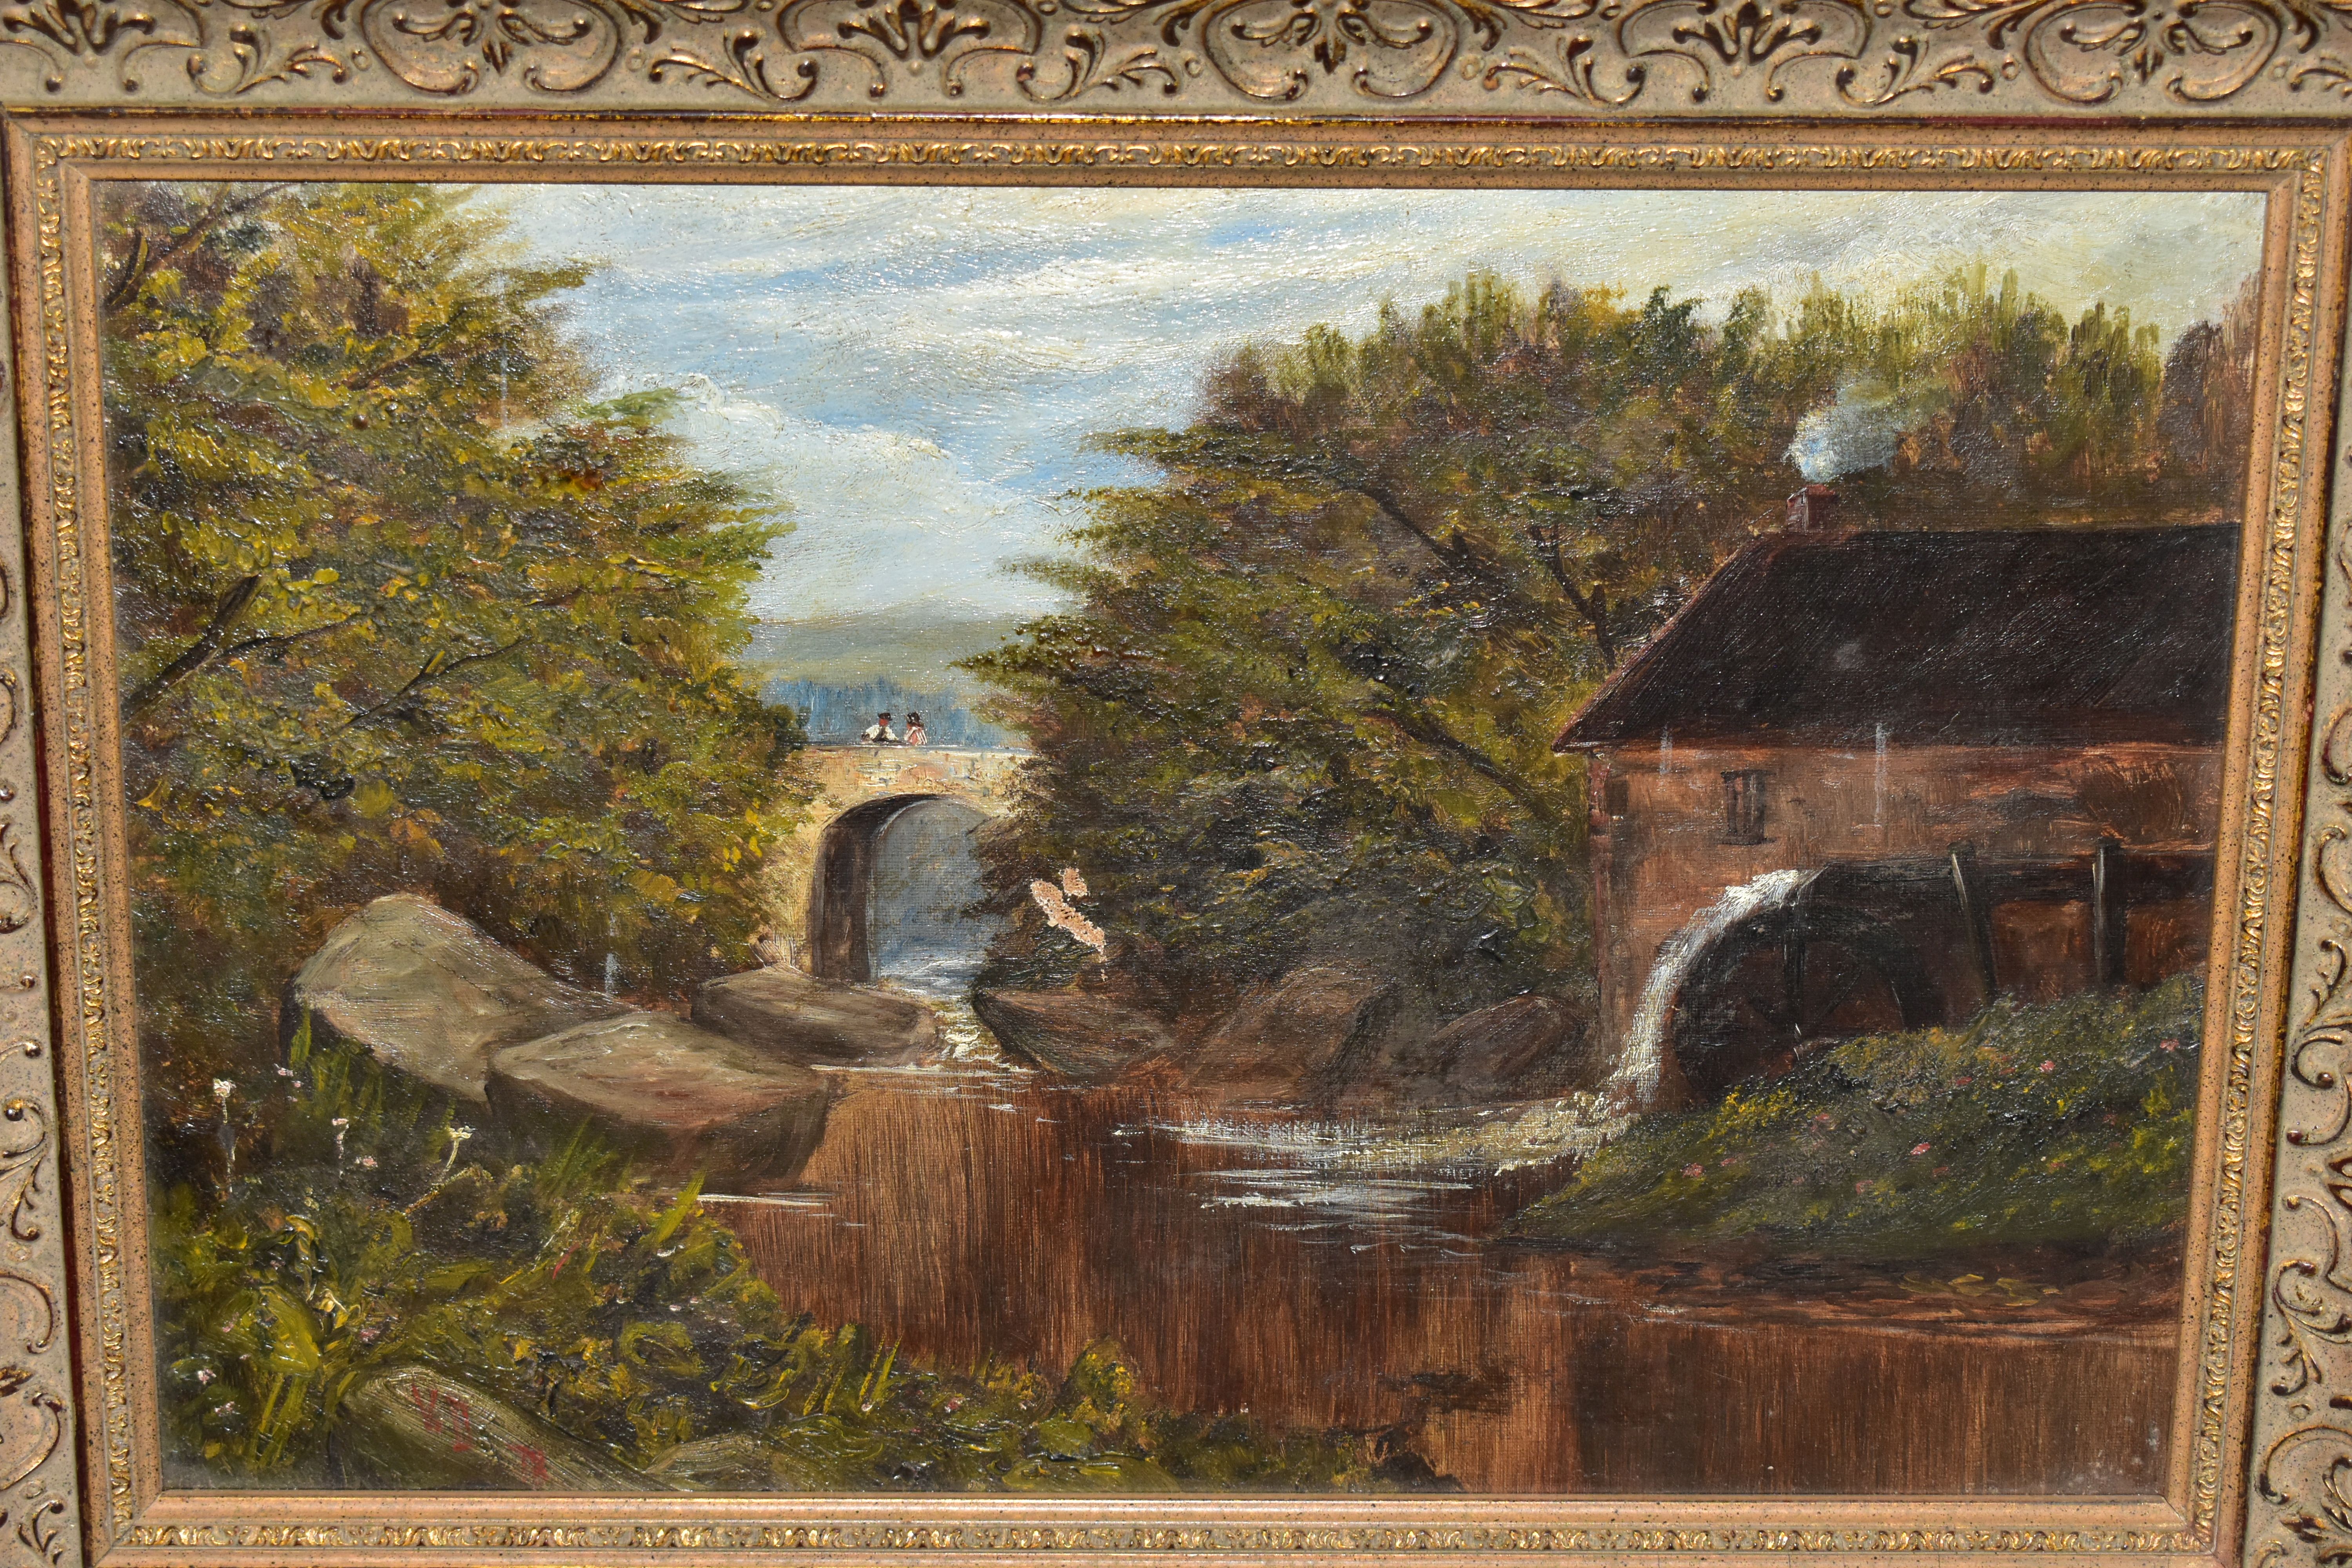 JOSEPH VICKERS DEVILLE (1856-1925) 'A WELSH MILL', a Welsh river landscape, watermill to the right - Image 2 of 5